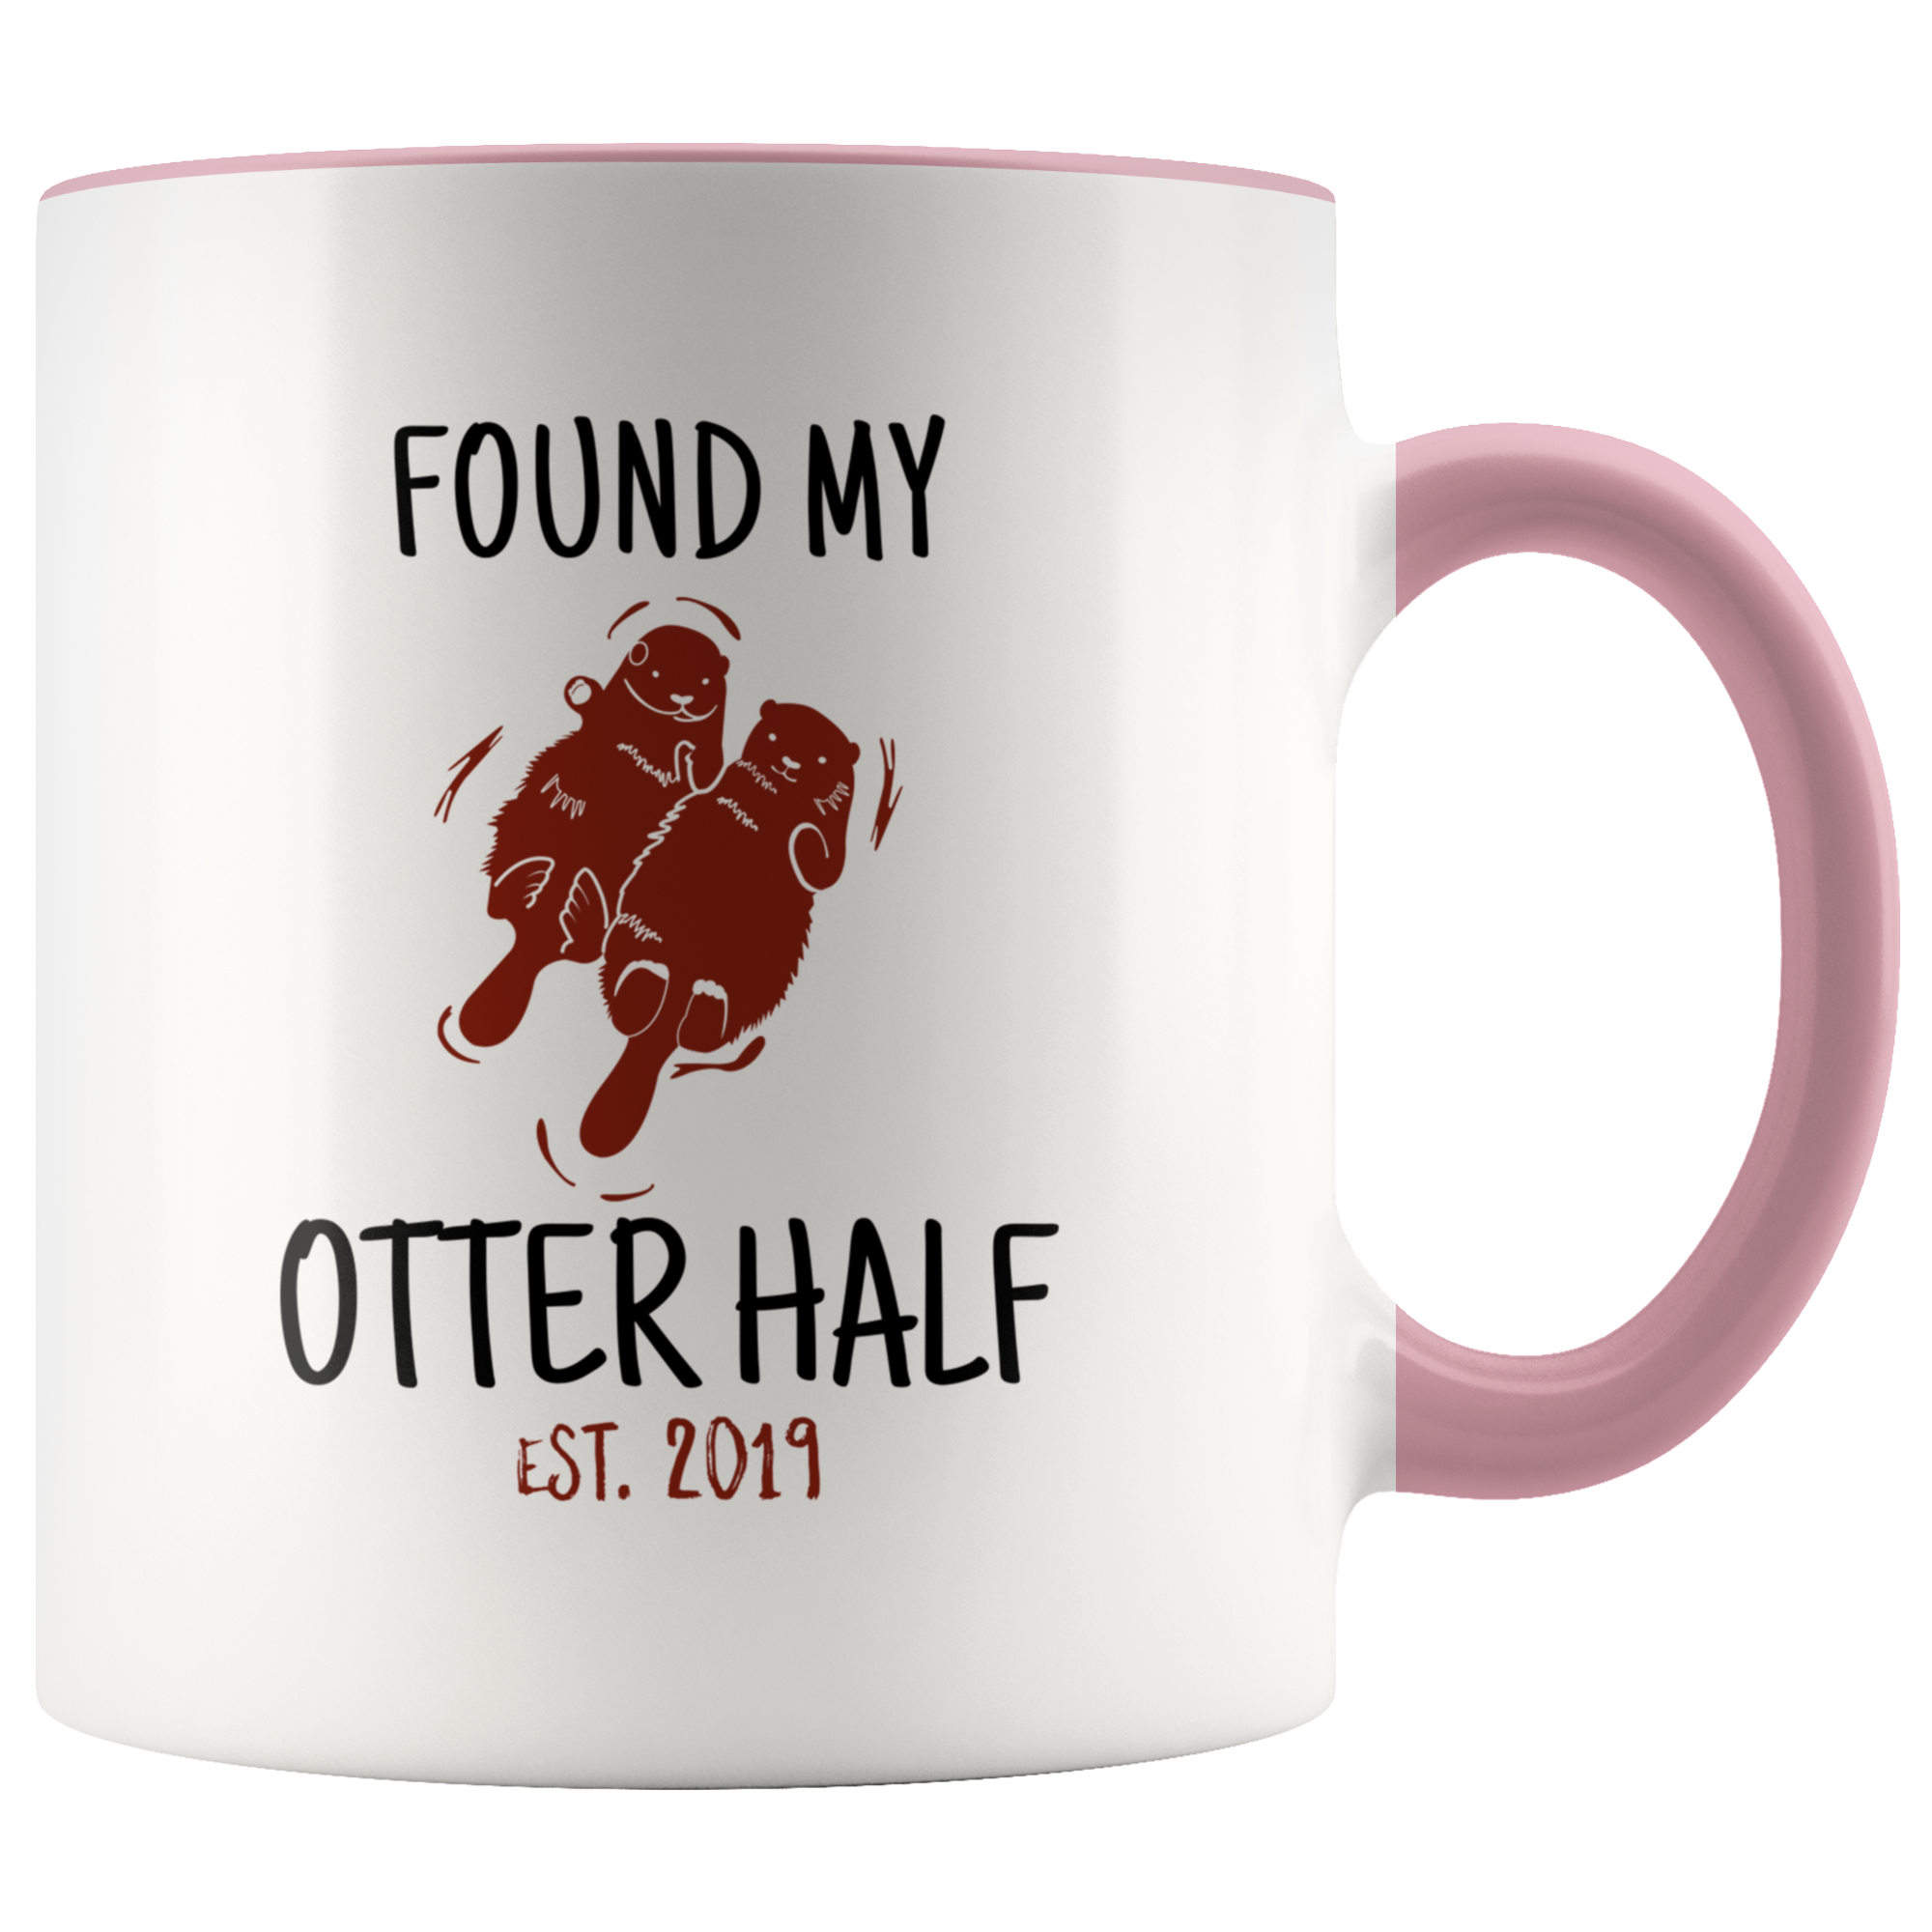 Found My Otter Half Accent Mug 2019 - Guestbookery